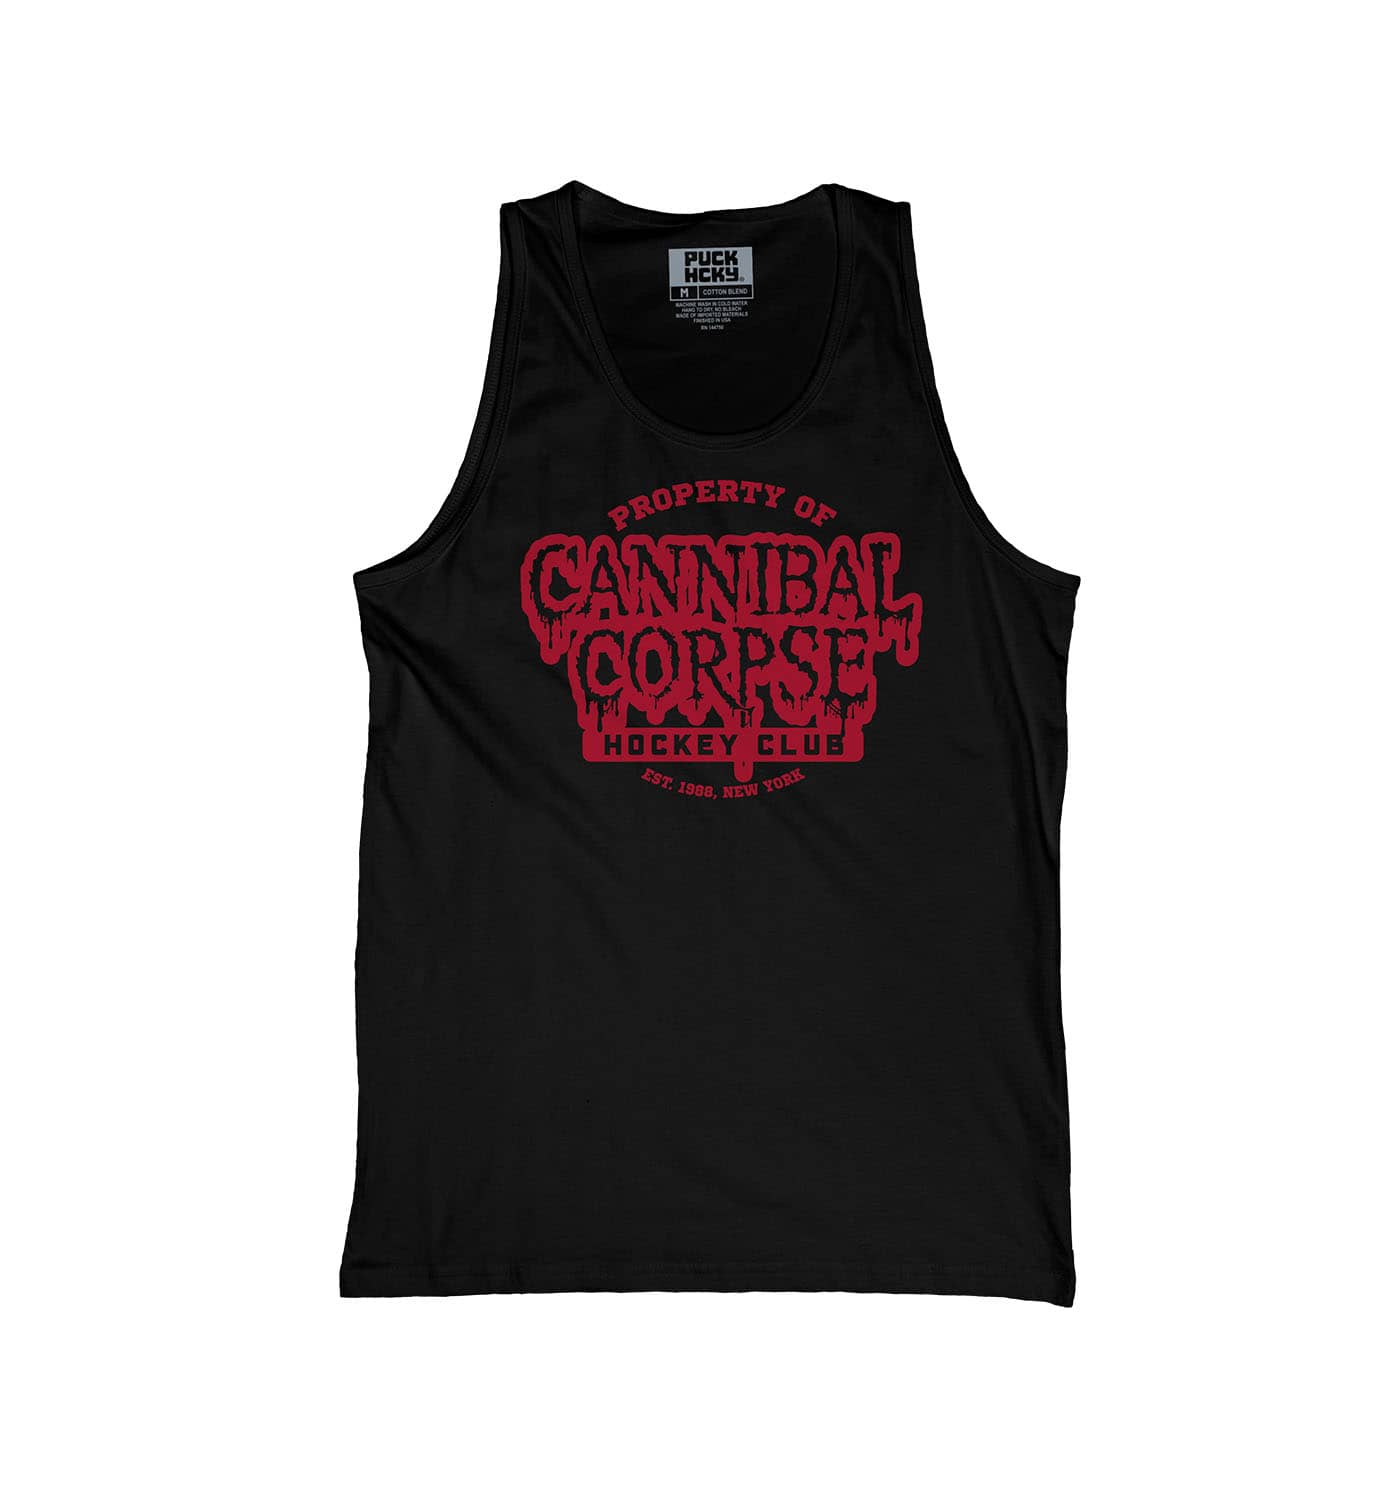 CANNIBAL CORPSE 'PROPERTY OF' hockey tank top in black front view